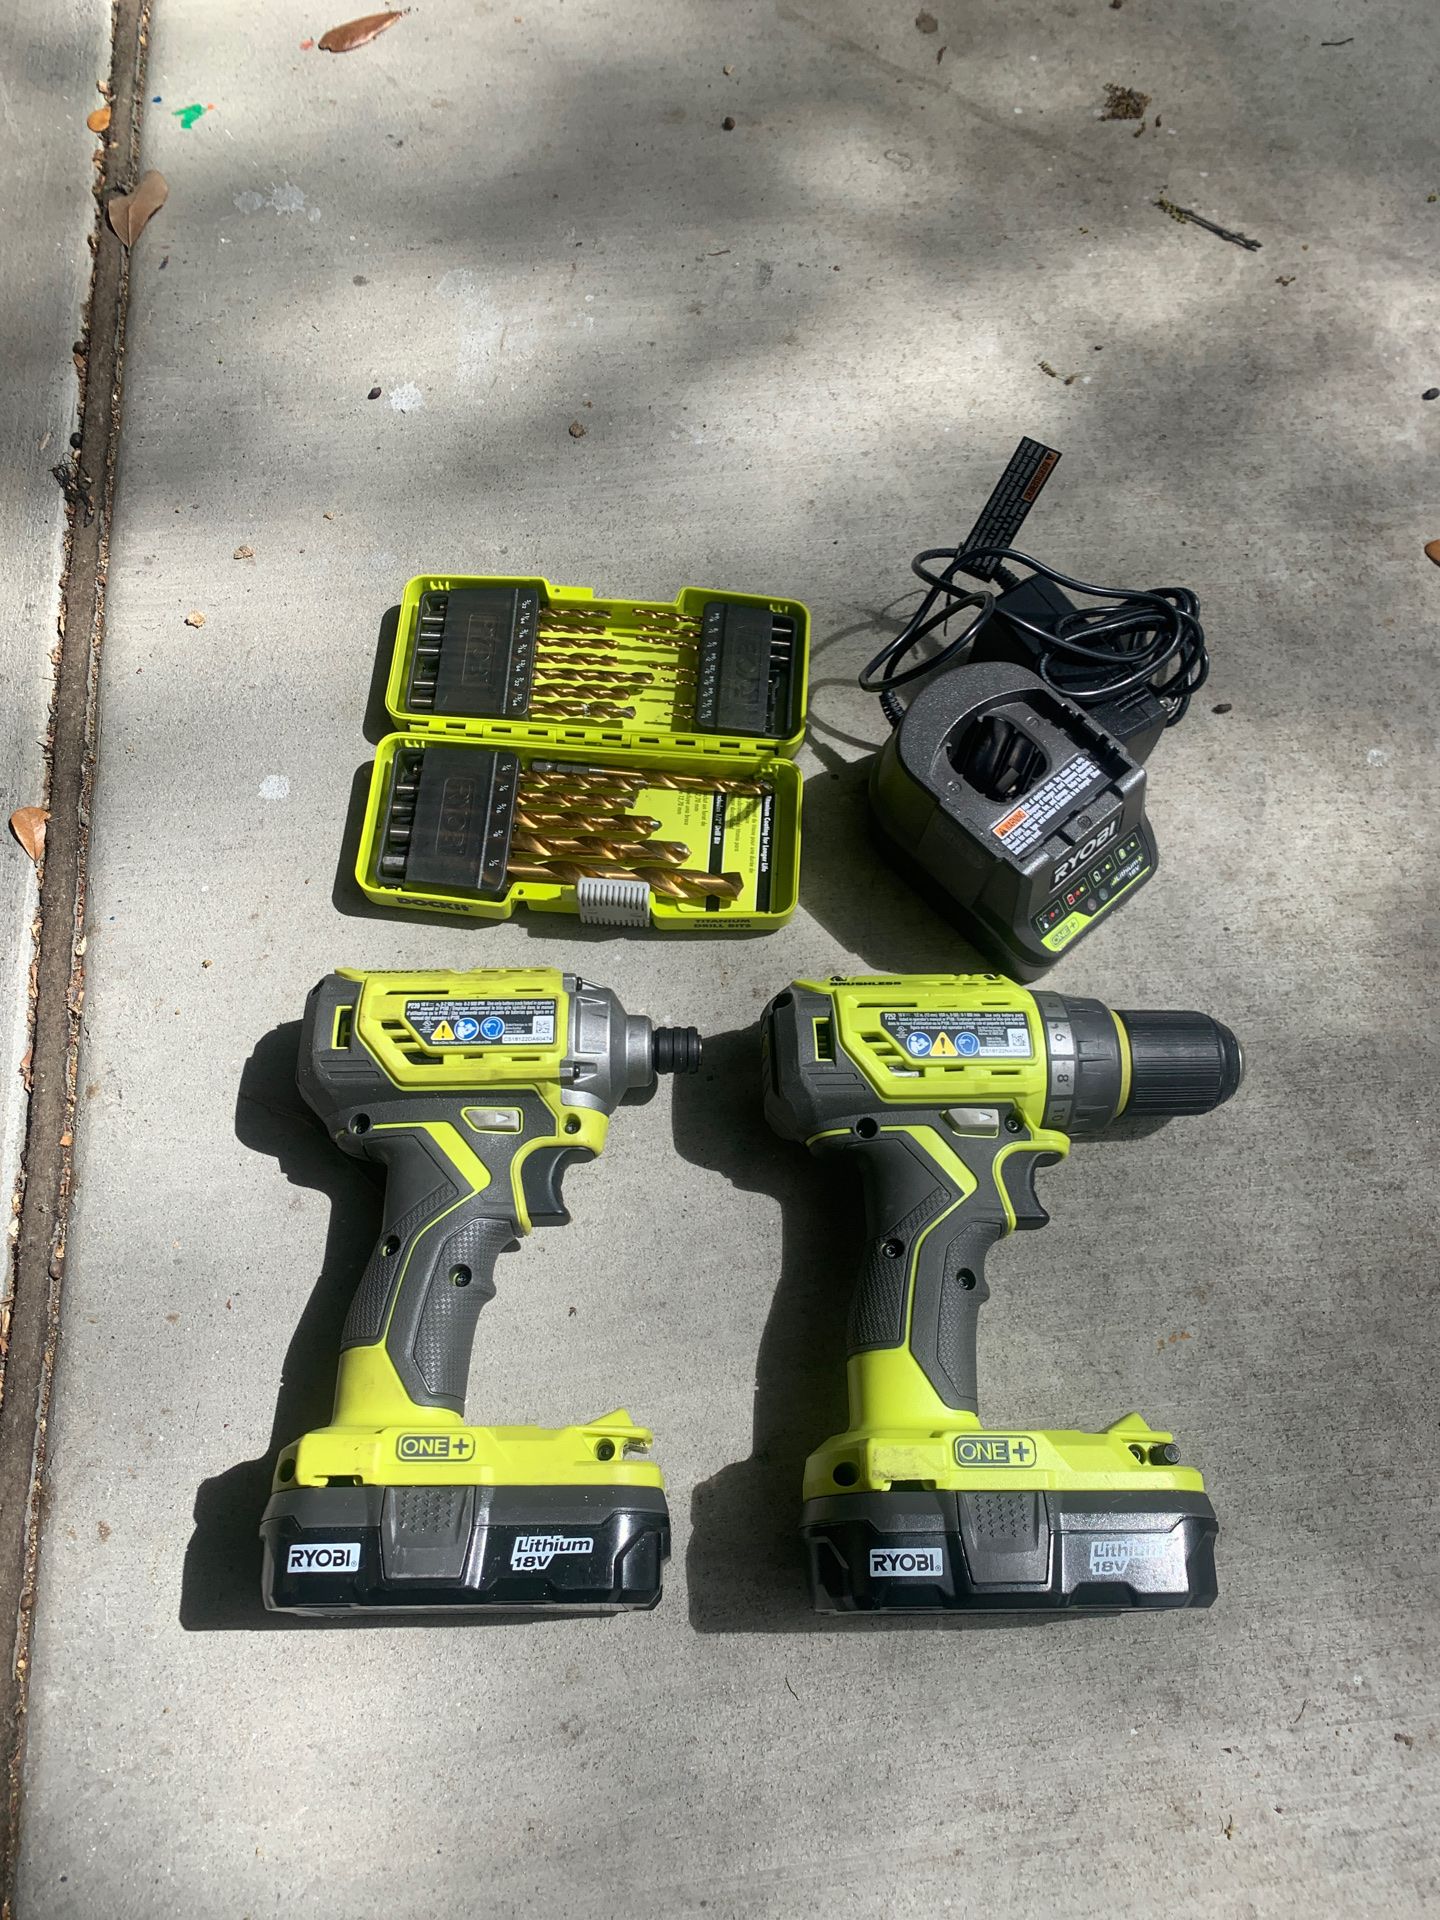 Ryobi Drill/ Impact Drill set w/ batteries and charger